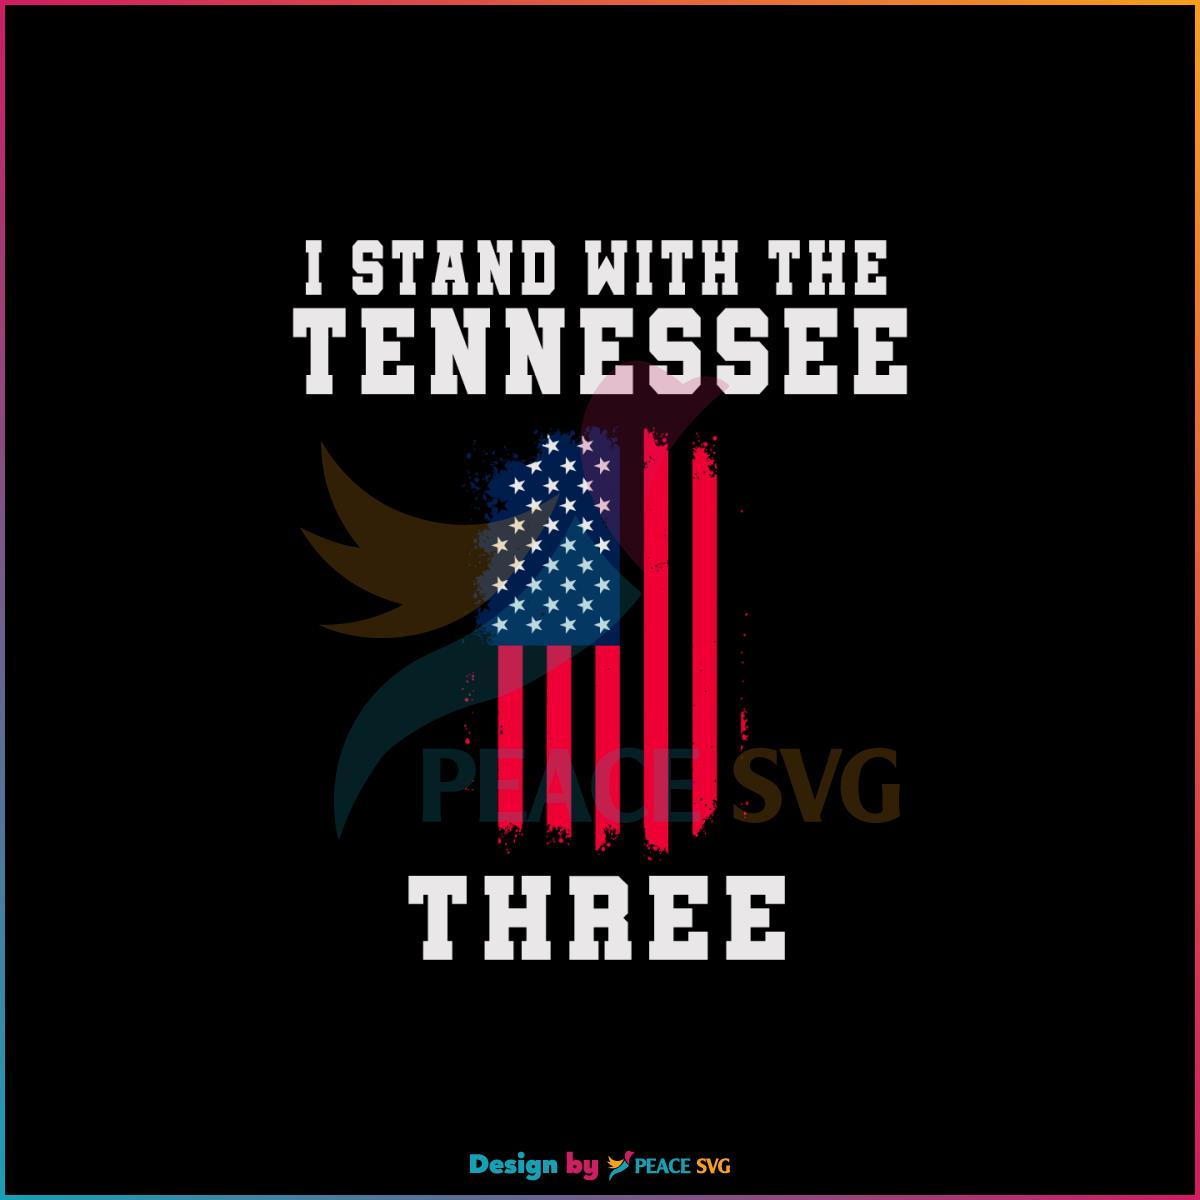 Stand With The Tennessee Three America Flag SVG Cutting Files